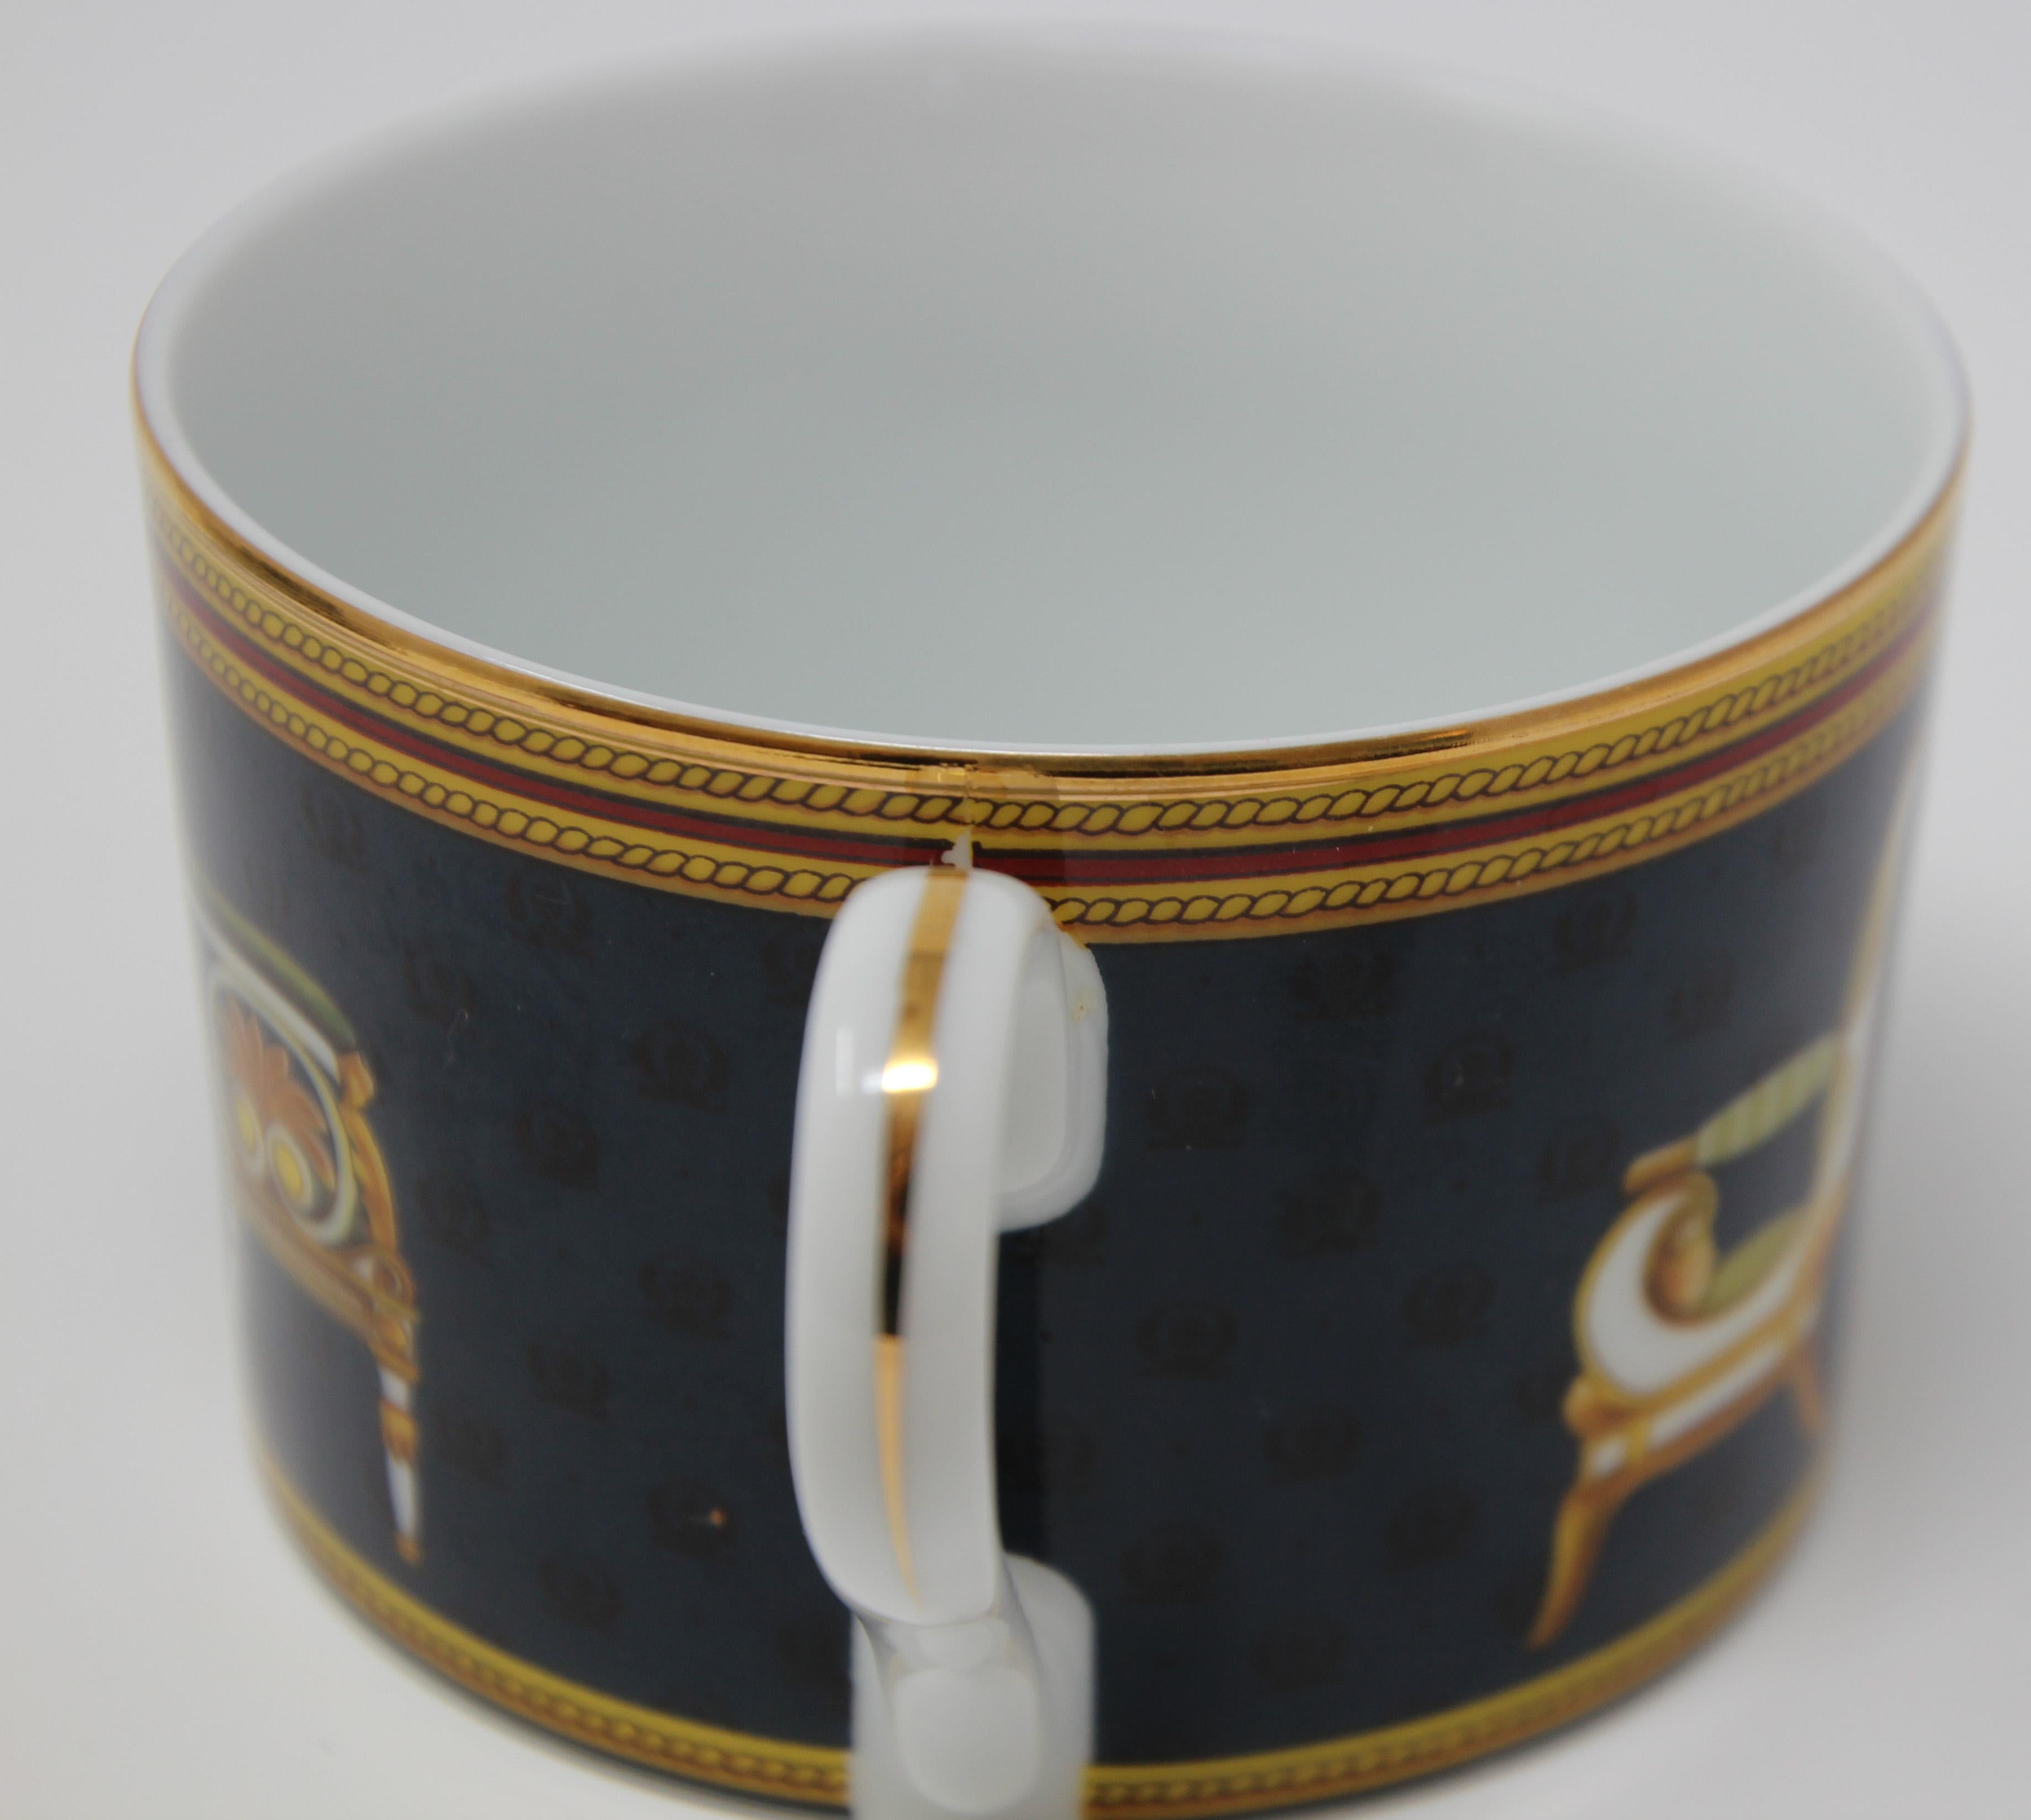 Gucci Porcelain Tea Cups and Saucers Set of 2 8